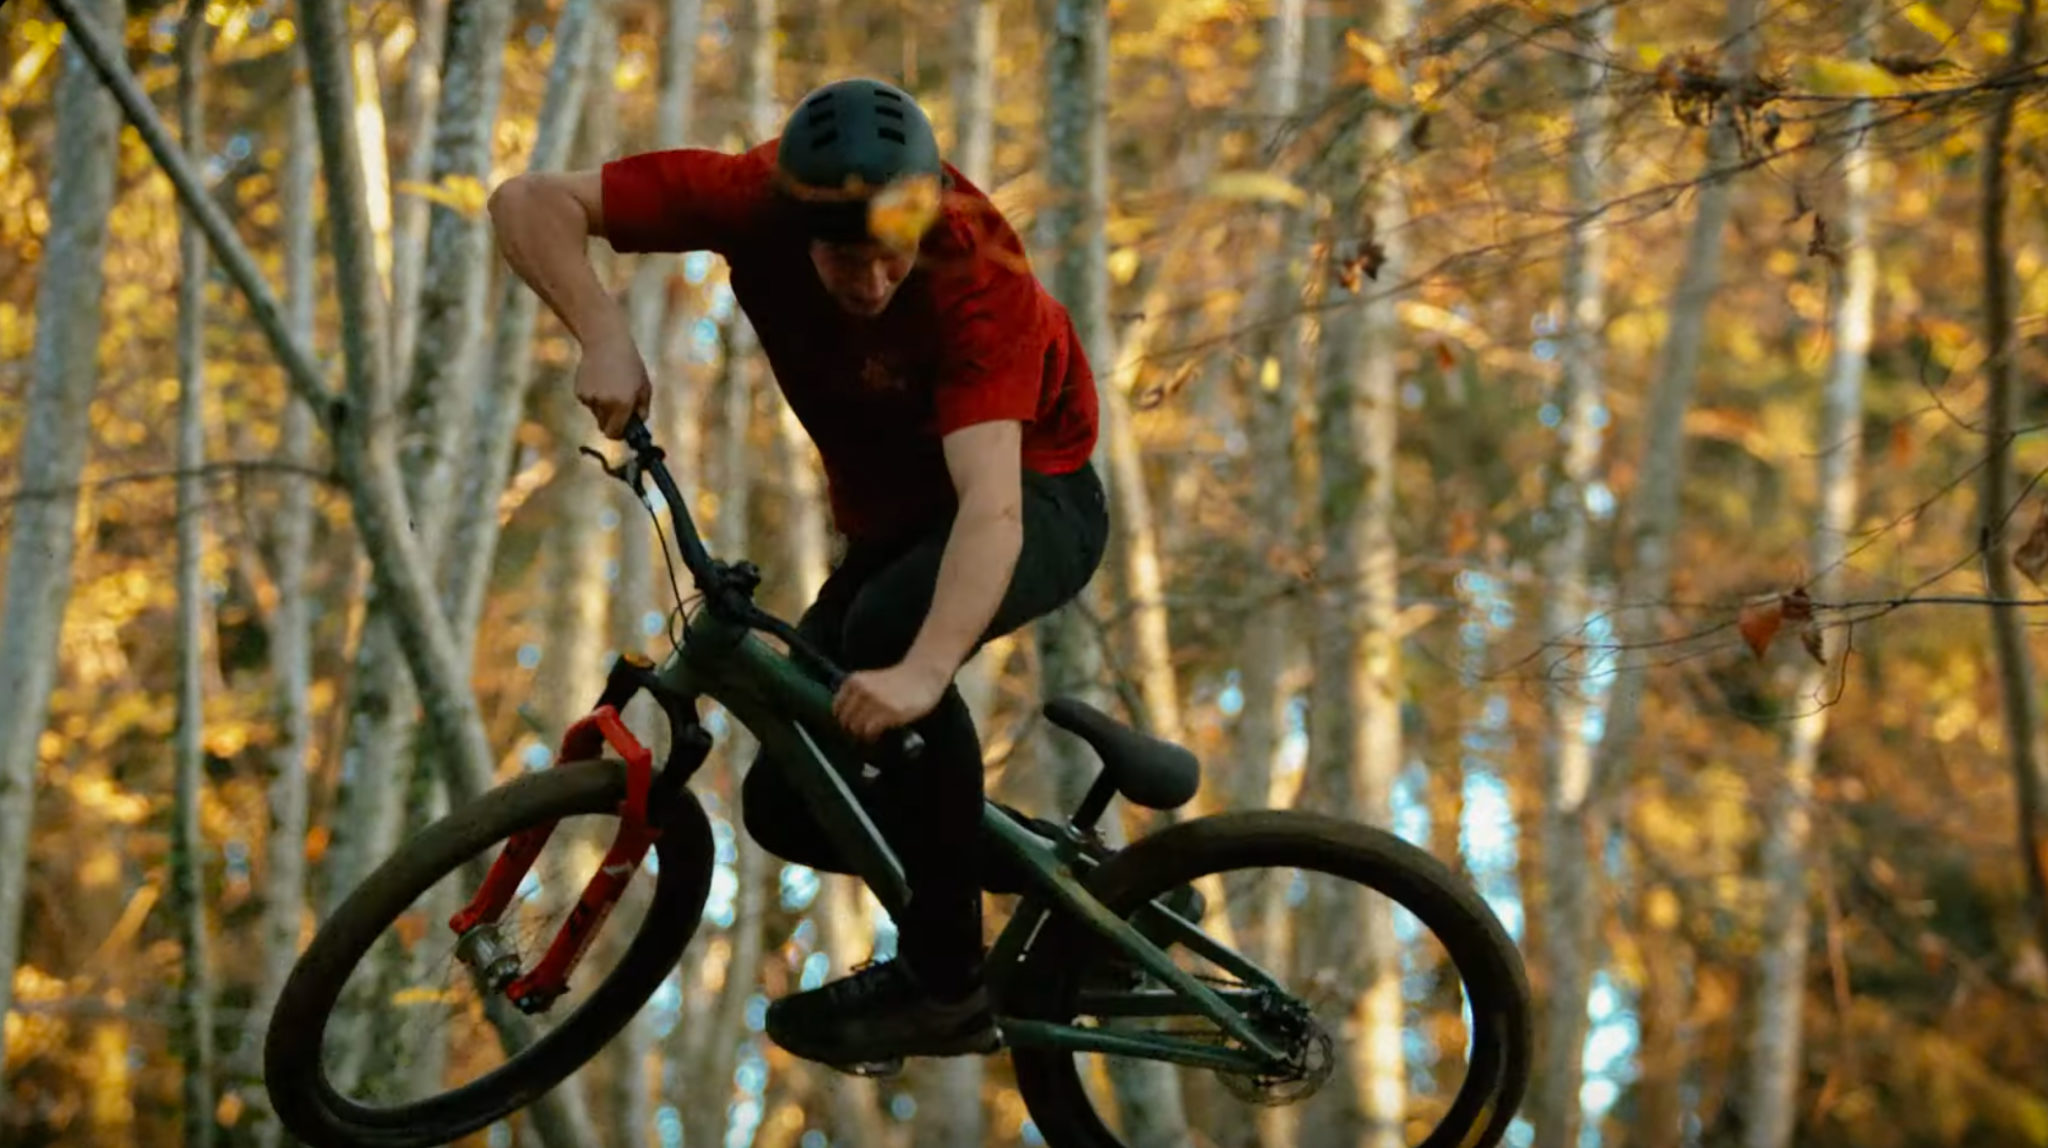 Vincent Tupin – Riding all the bikes